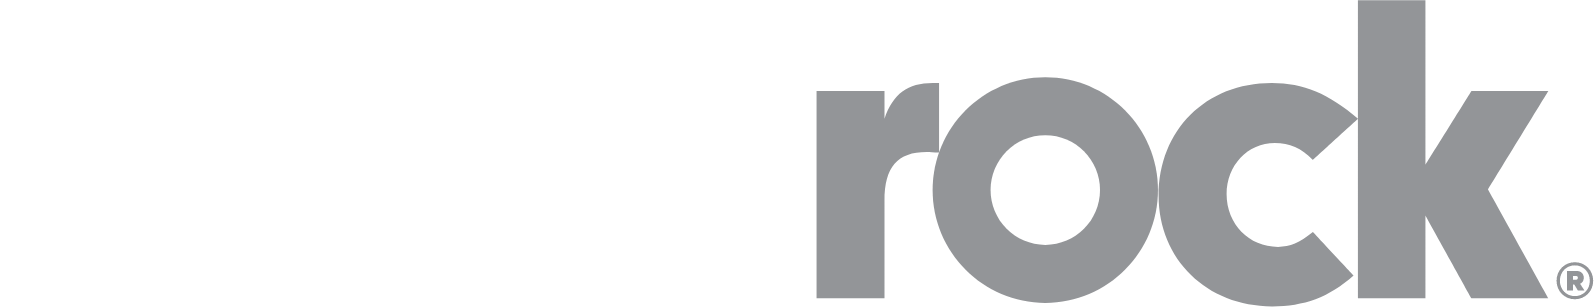 Archrock logo in transparent PNG and vectorized SVG formats